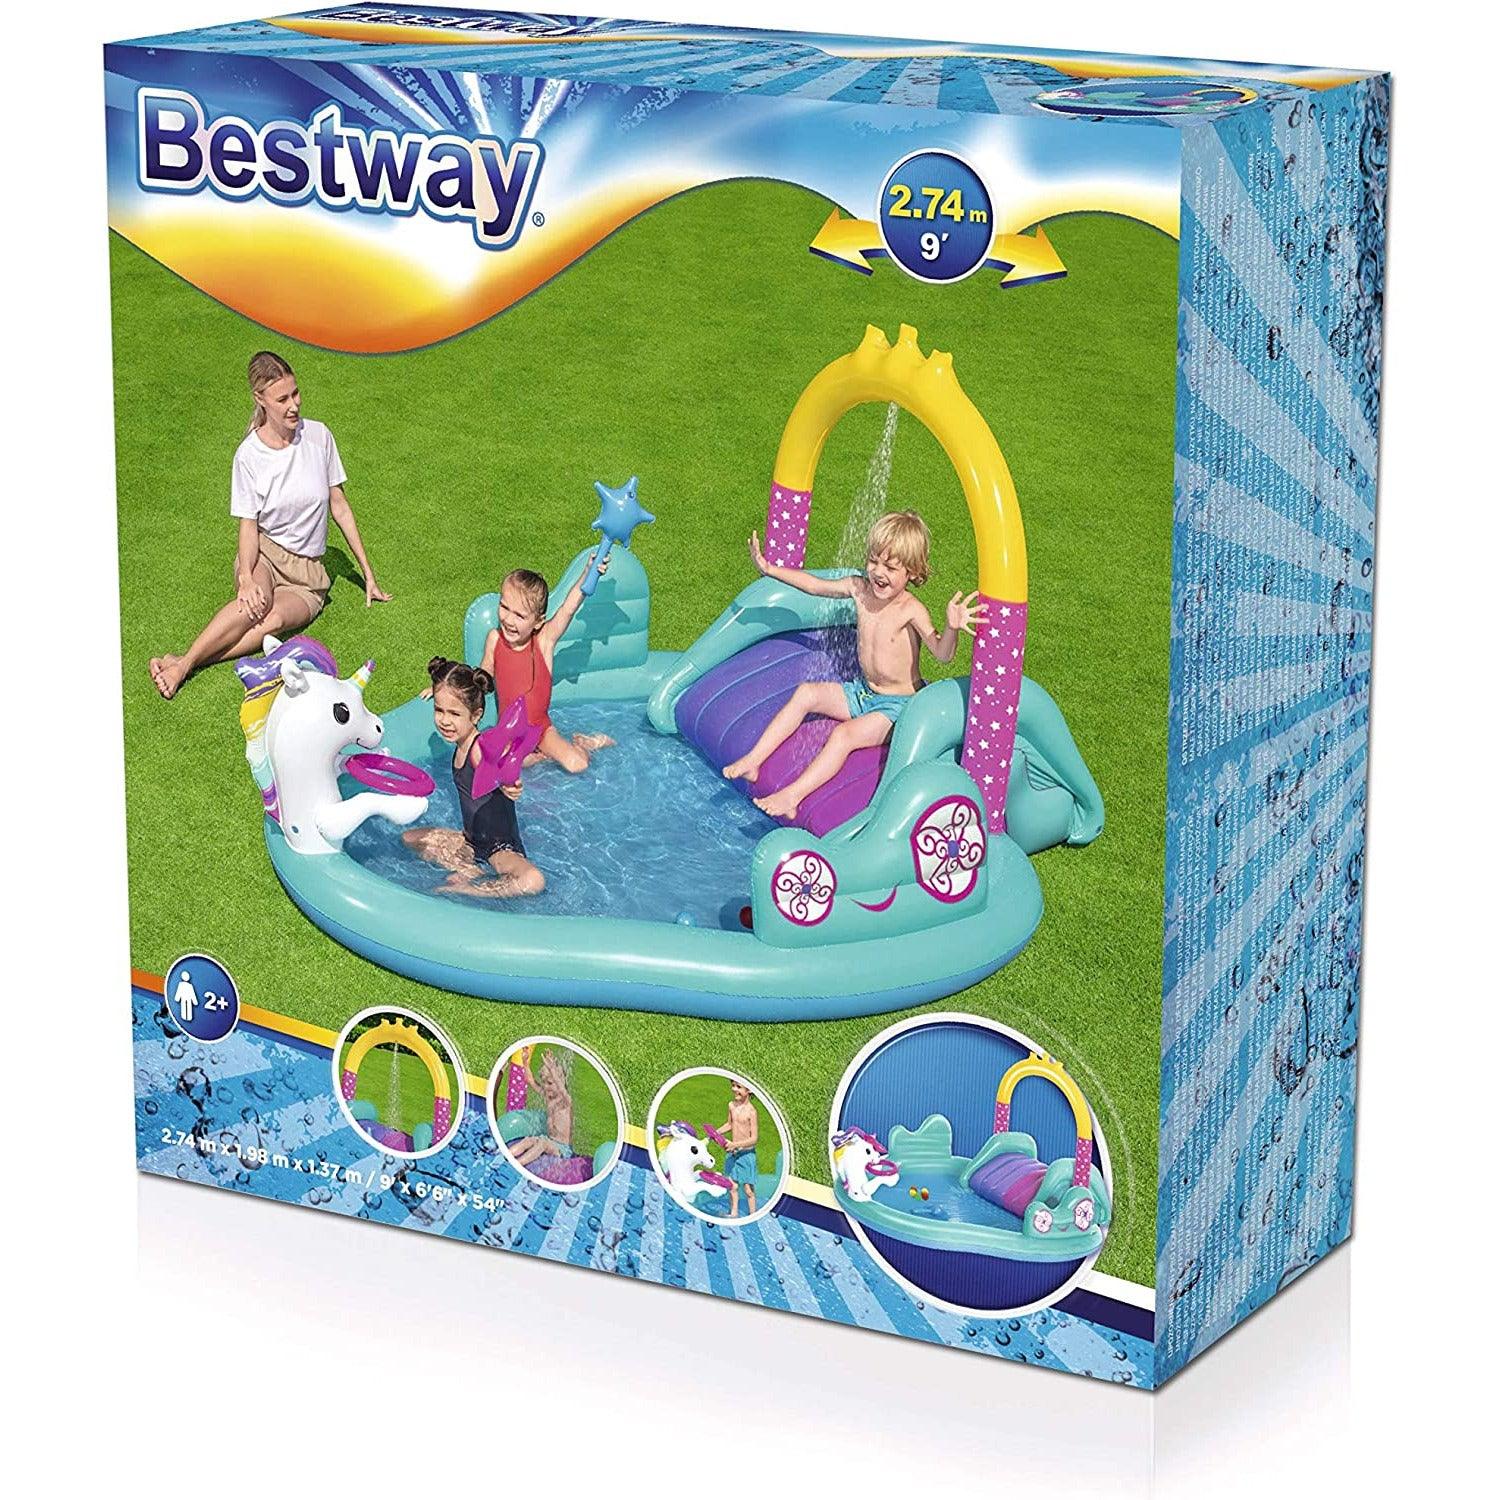 Bestway 53097 Inflatable Play Center with Inflatable Unicorn - BumbleToys - 8-13 Years, Boys, Eagle Plus, Floaters, Island, Sand Toys Pools & Inflatables